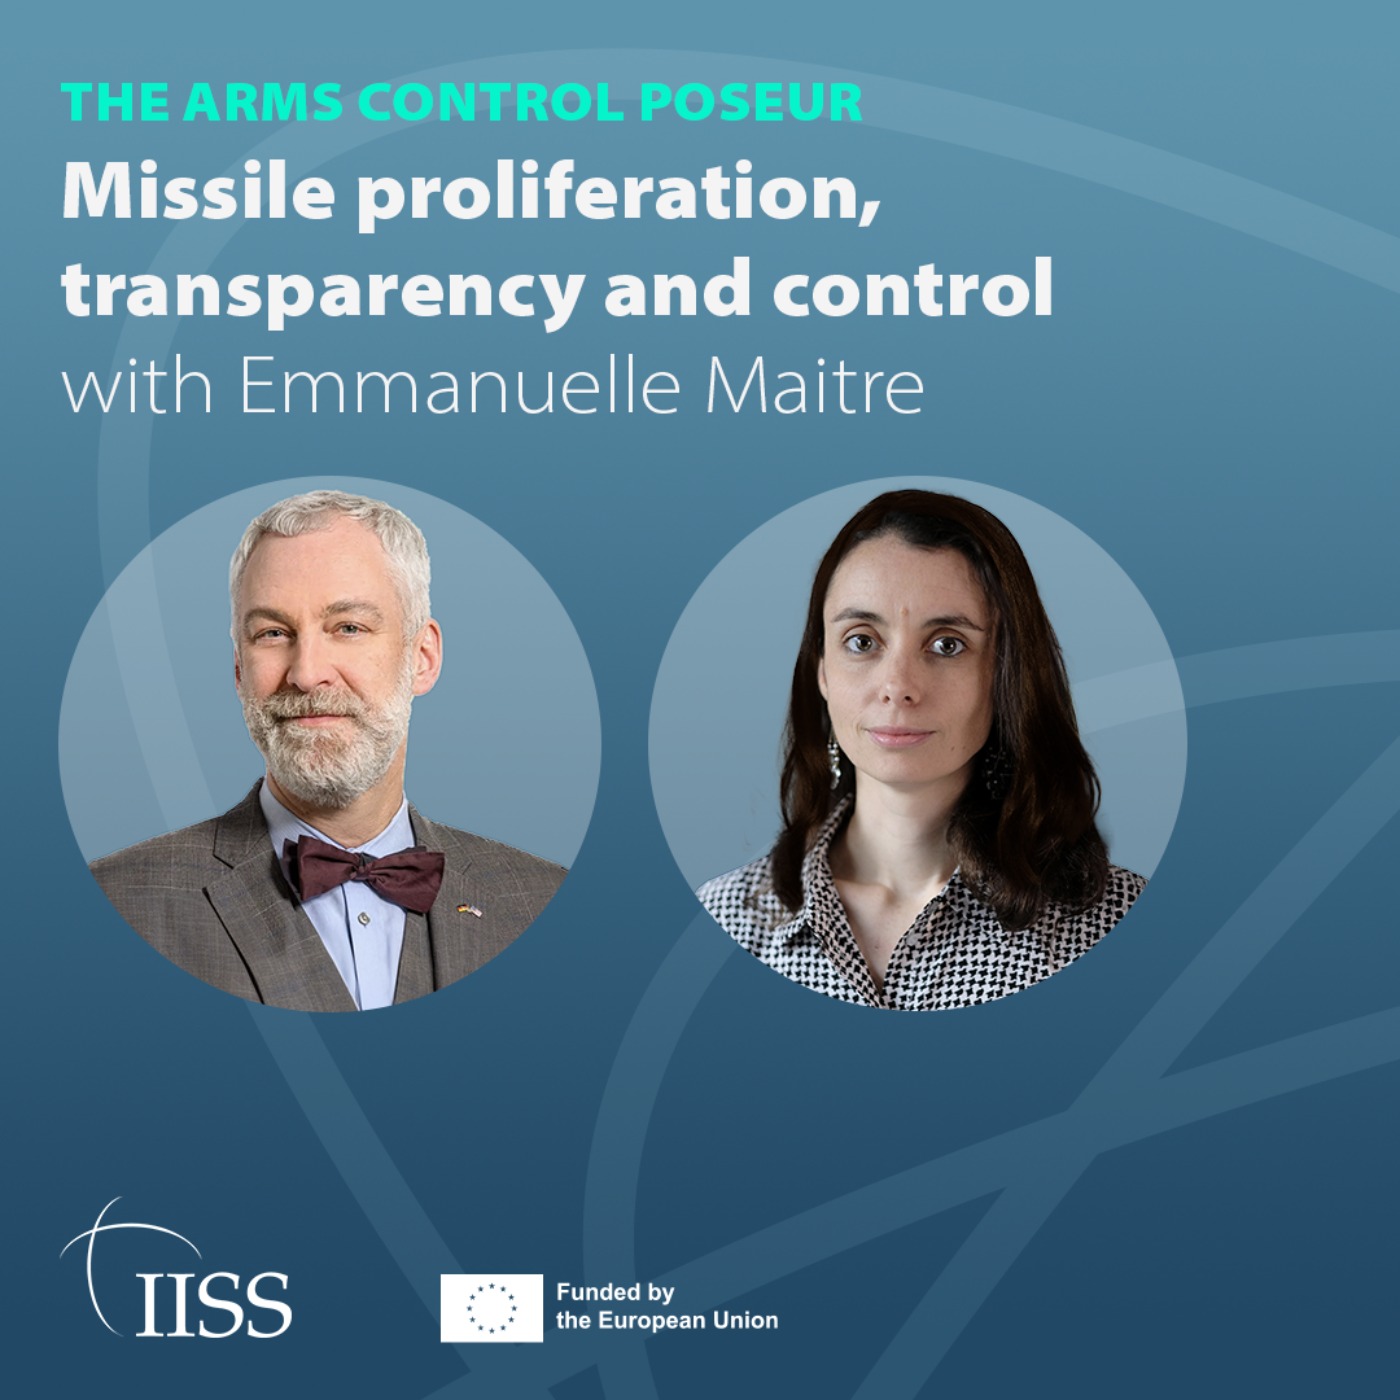 Missile proliferation, transparency and control with Emmanuelle Maitre